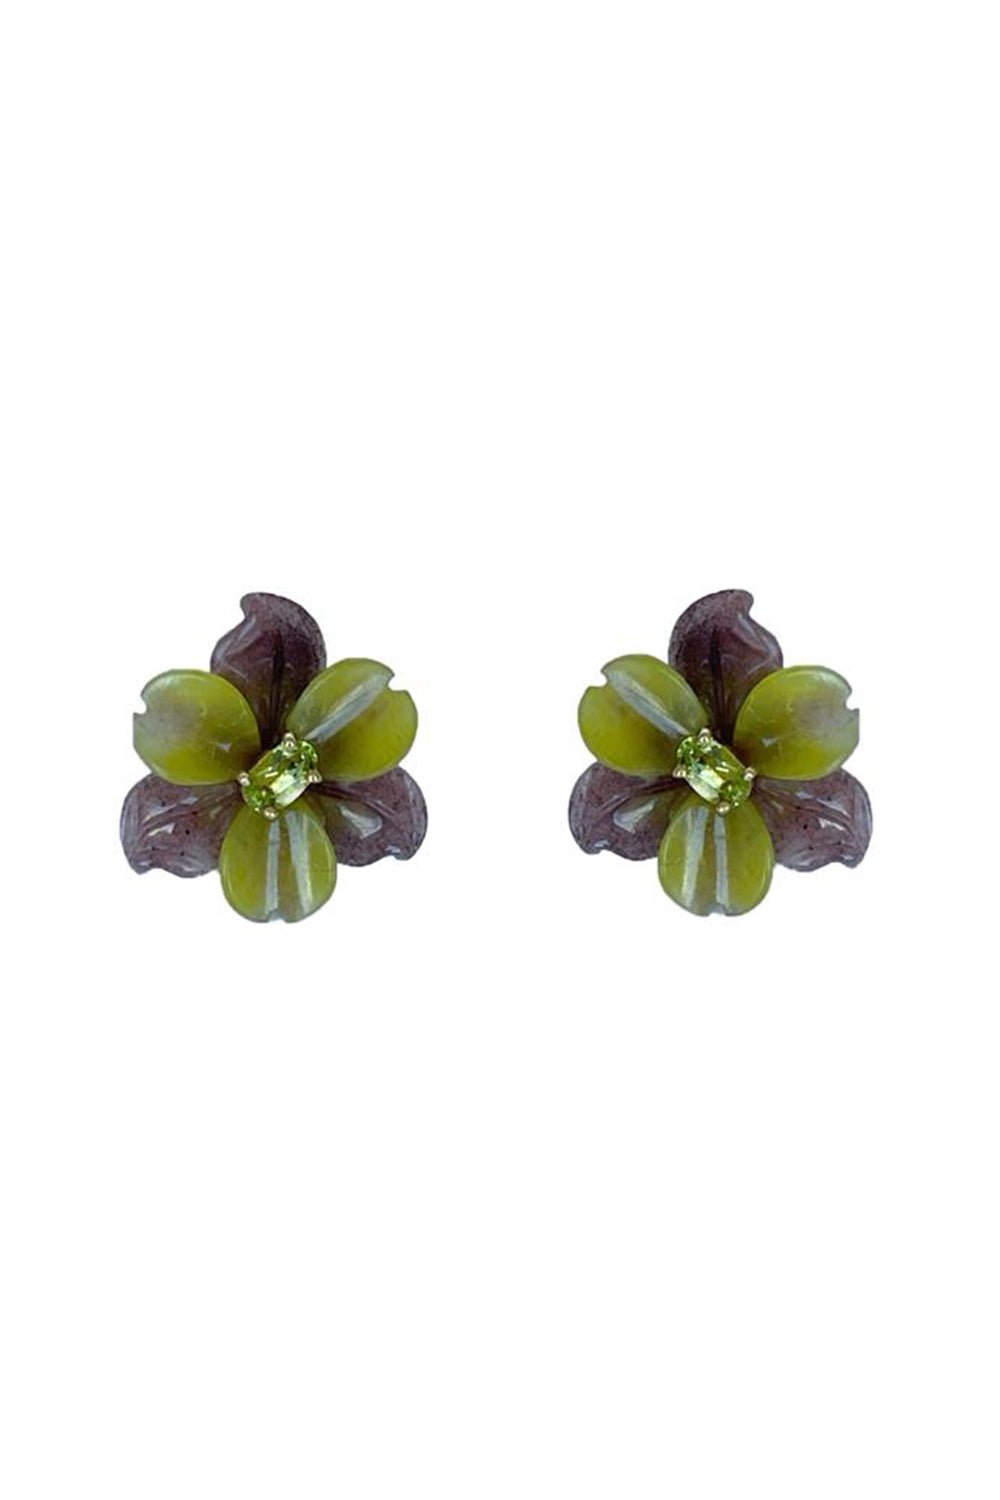 CASA CASTRO-Small Aventurine Mother Nature Earrings-YELLOW GOLD